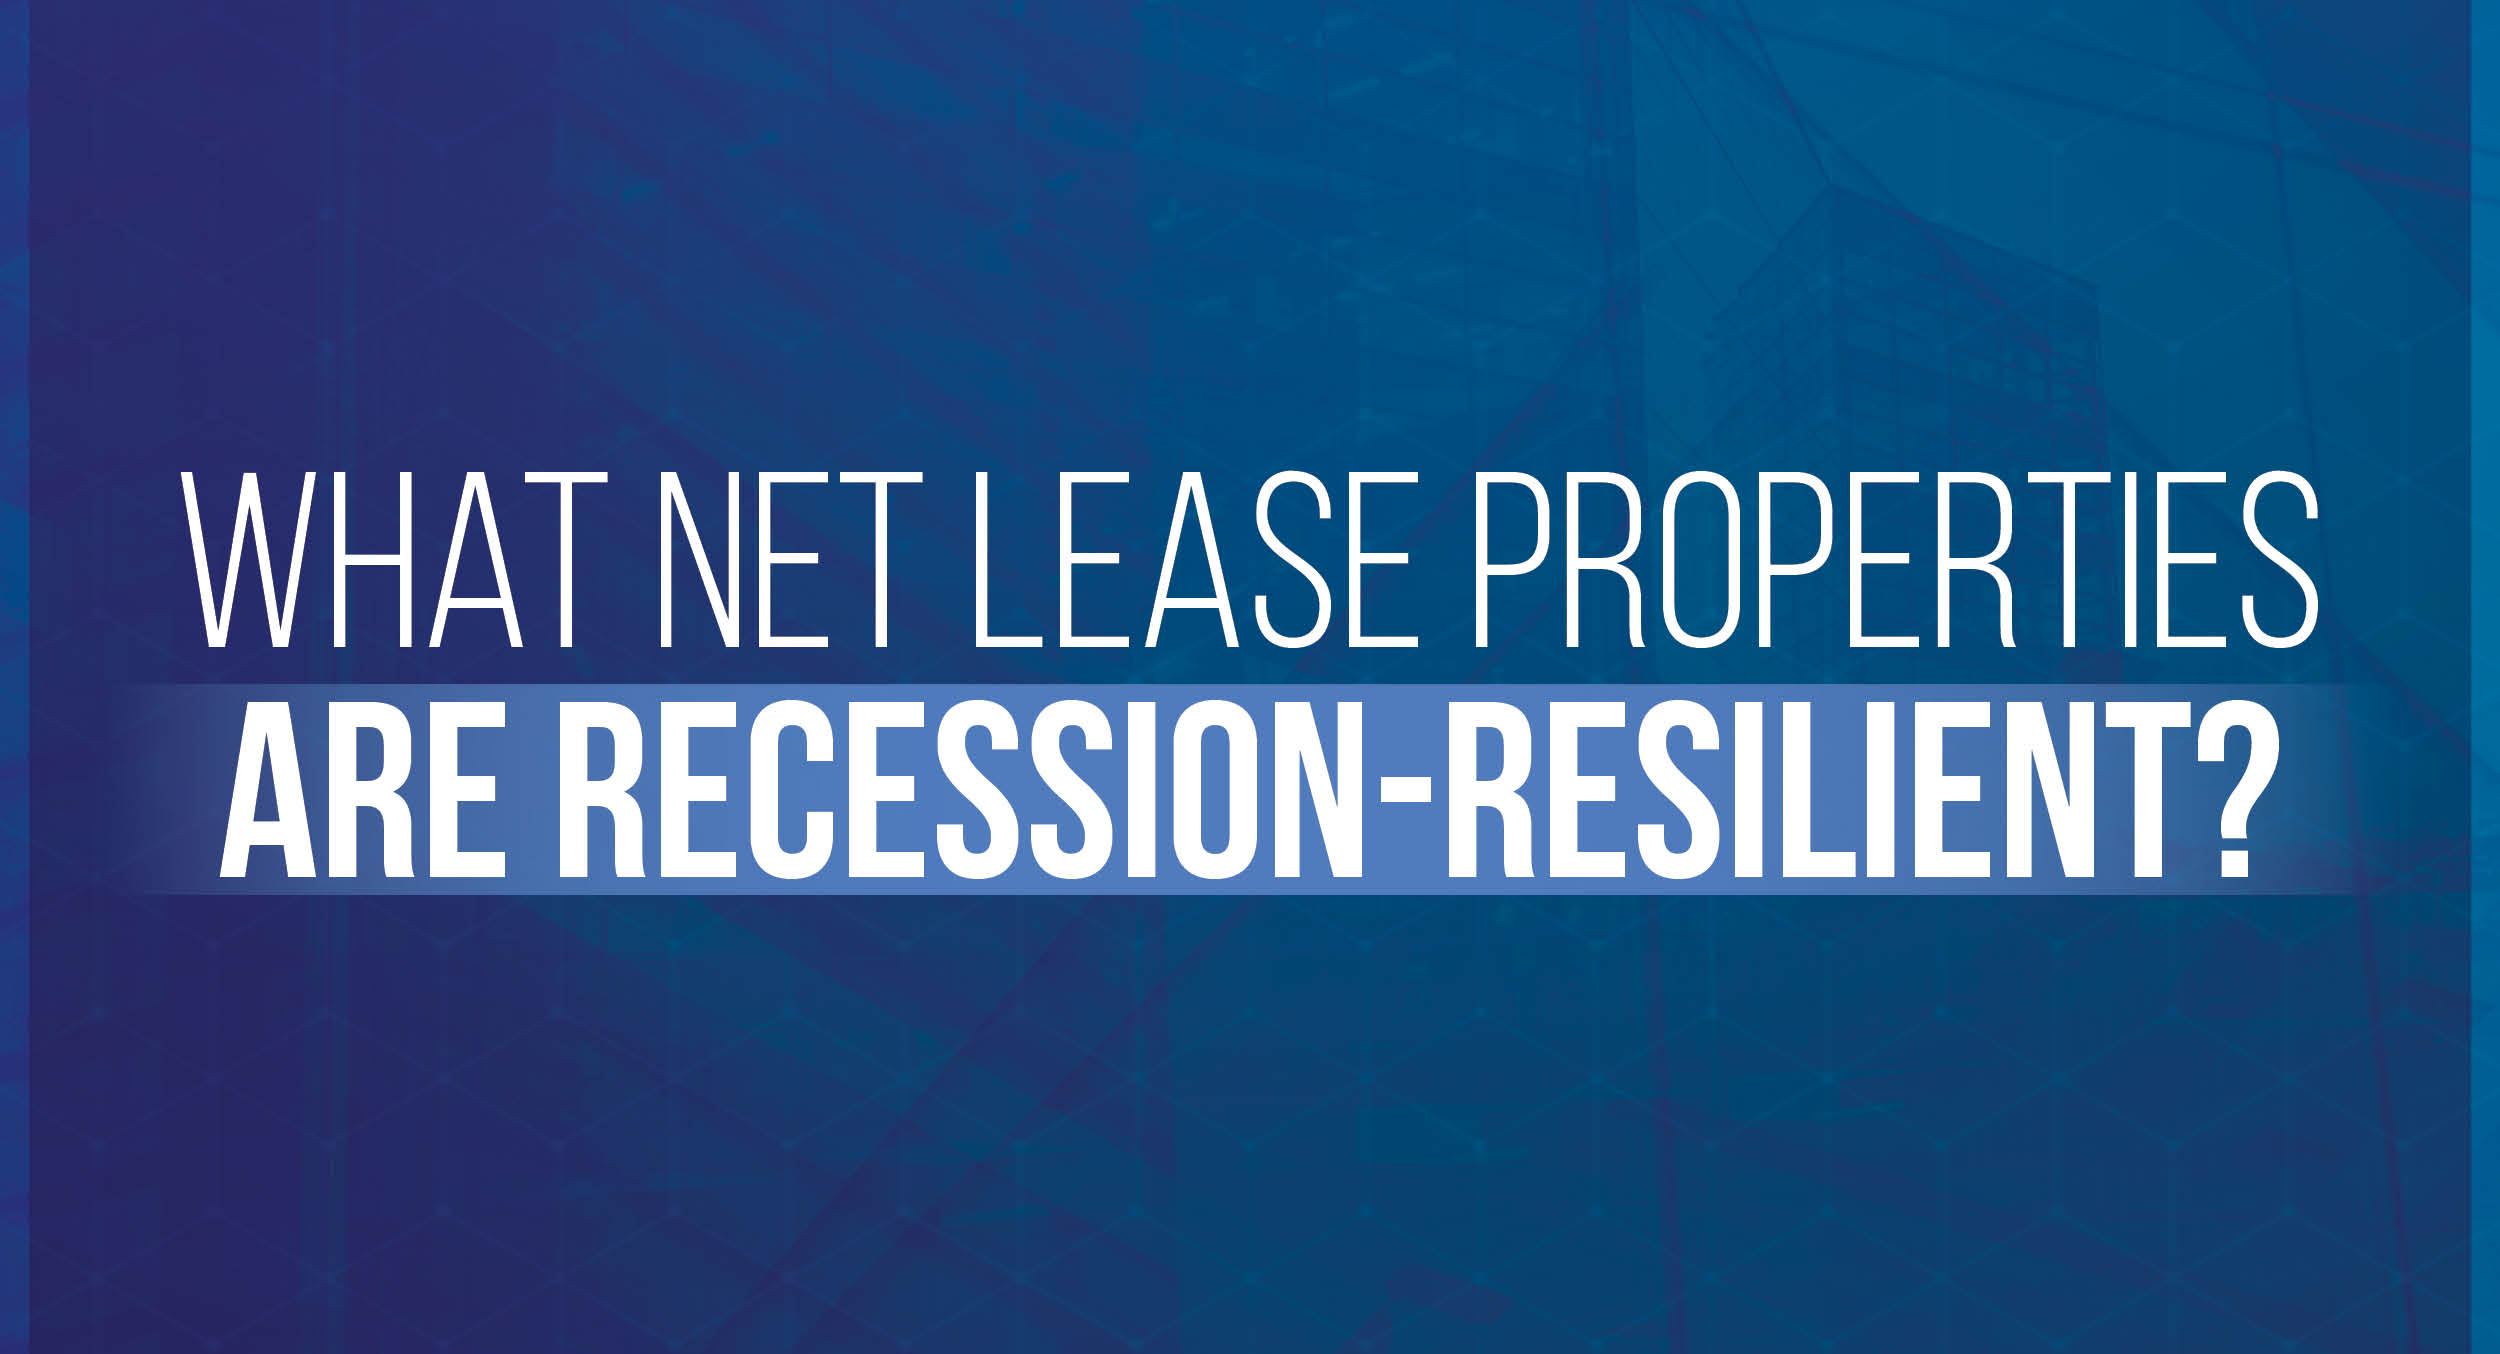 Email_What Net Lease Properties are Recession-Resilient-1